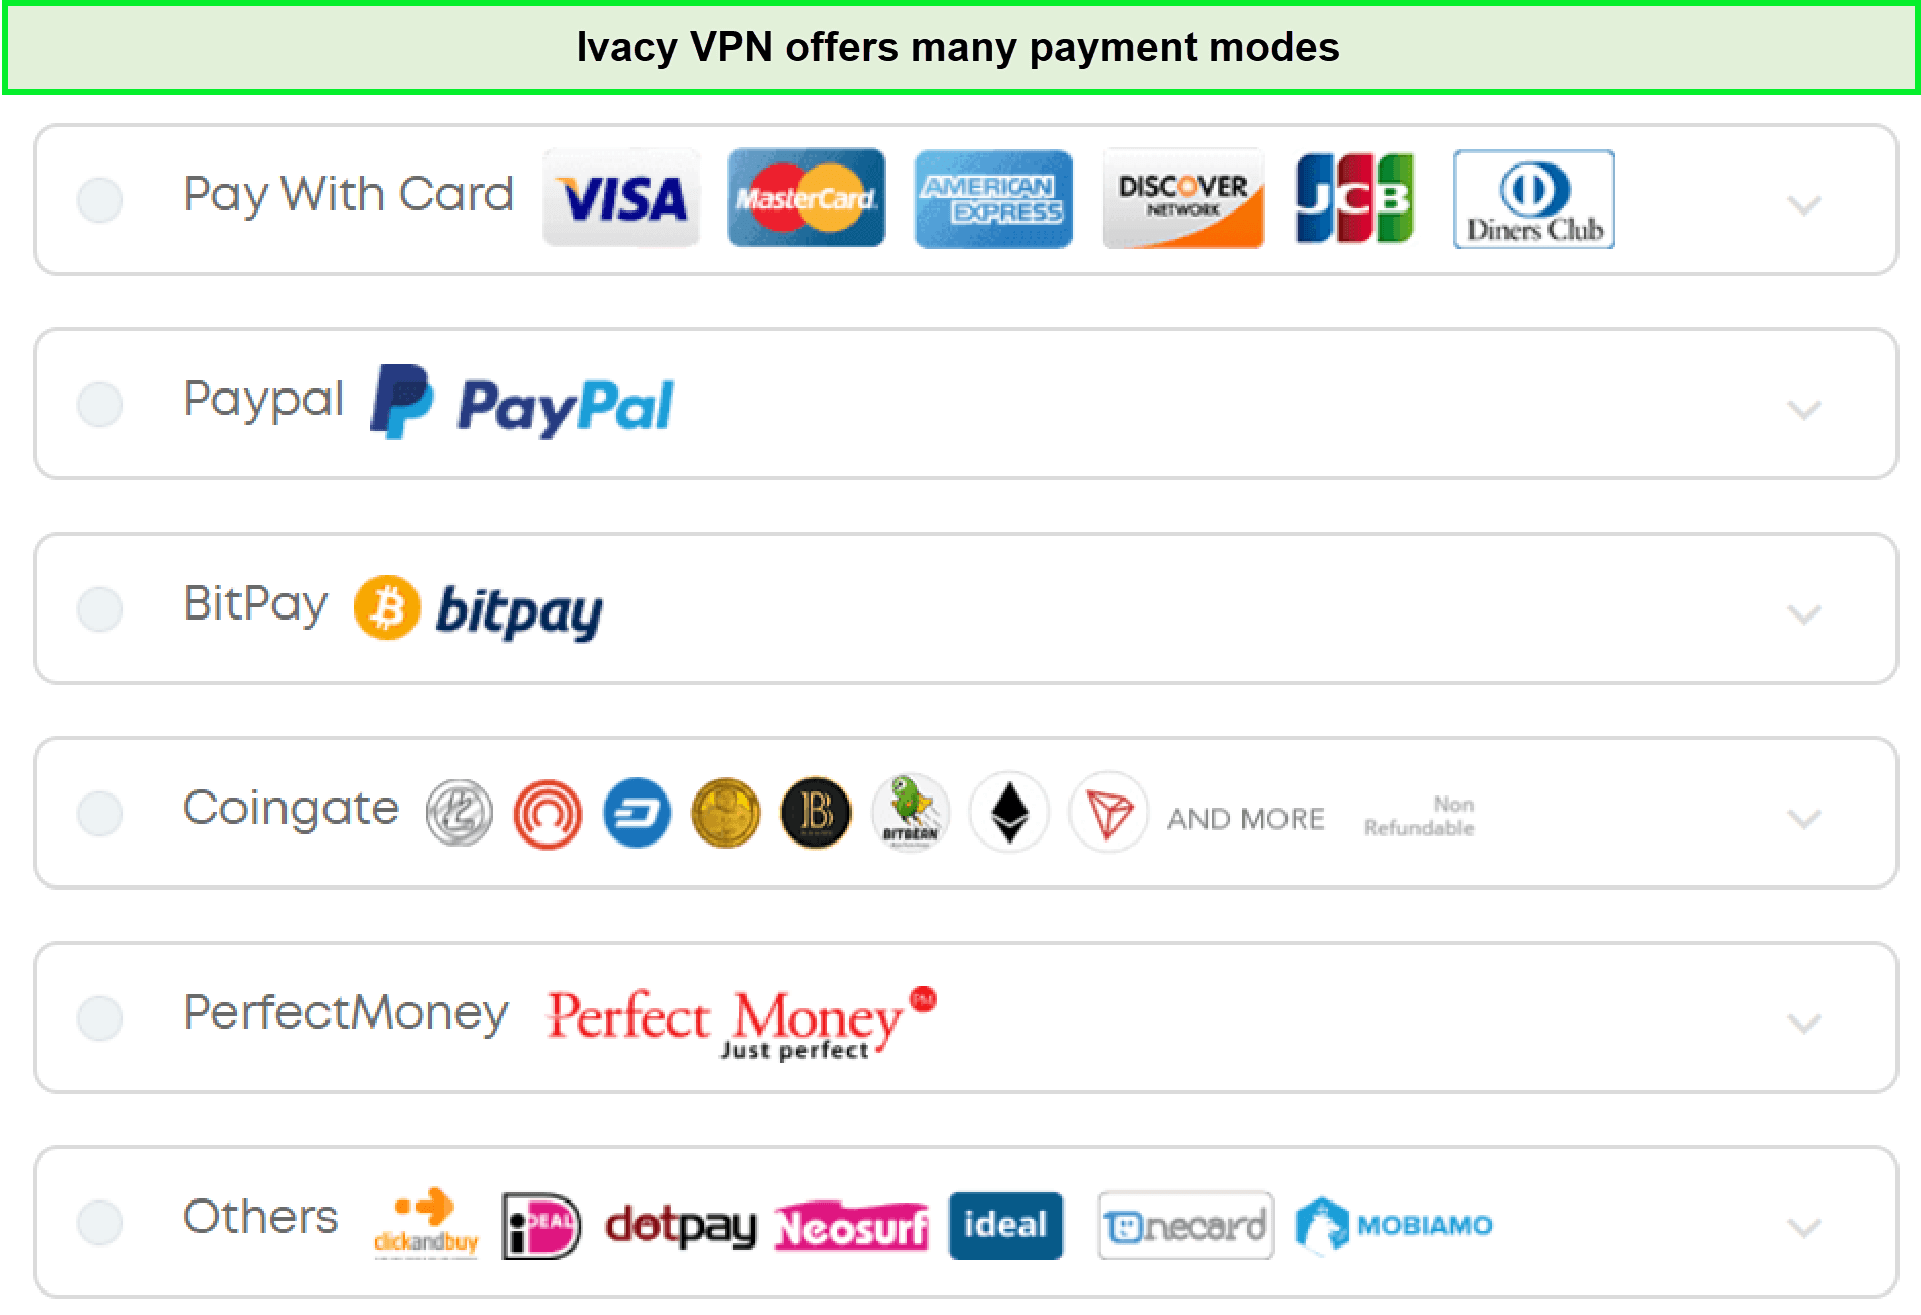 ivacy-payment-modes-in-USA